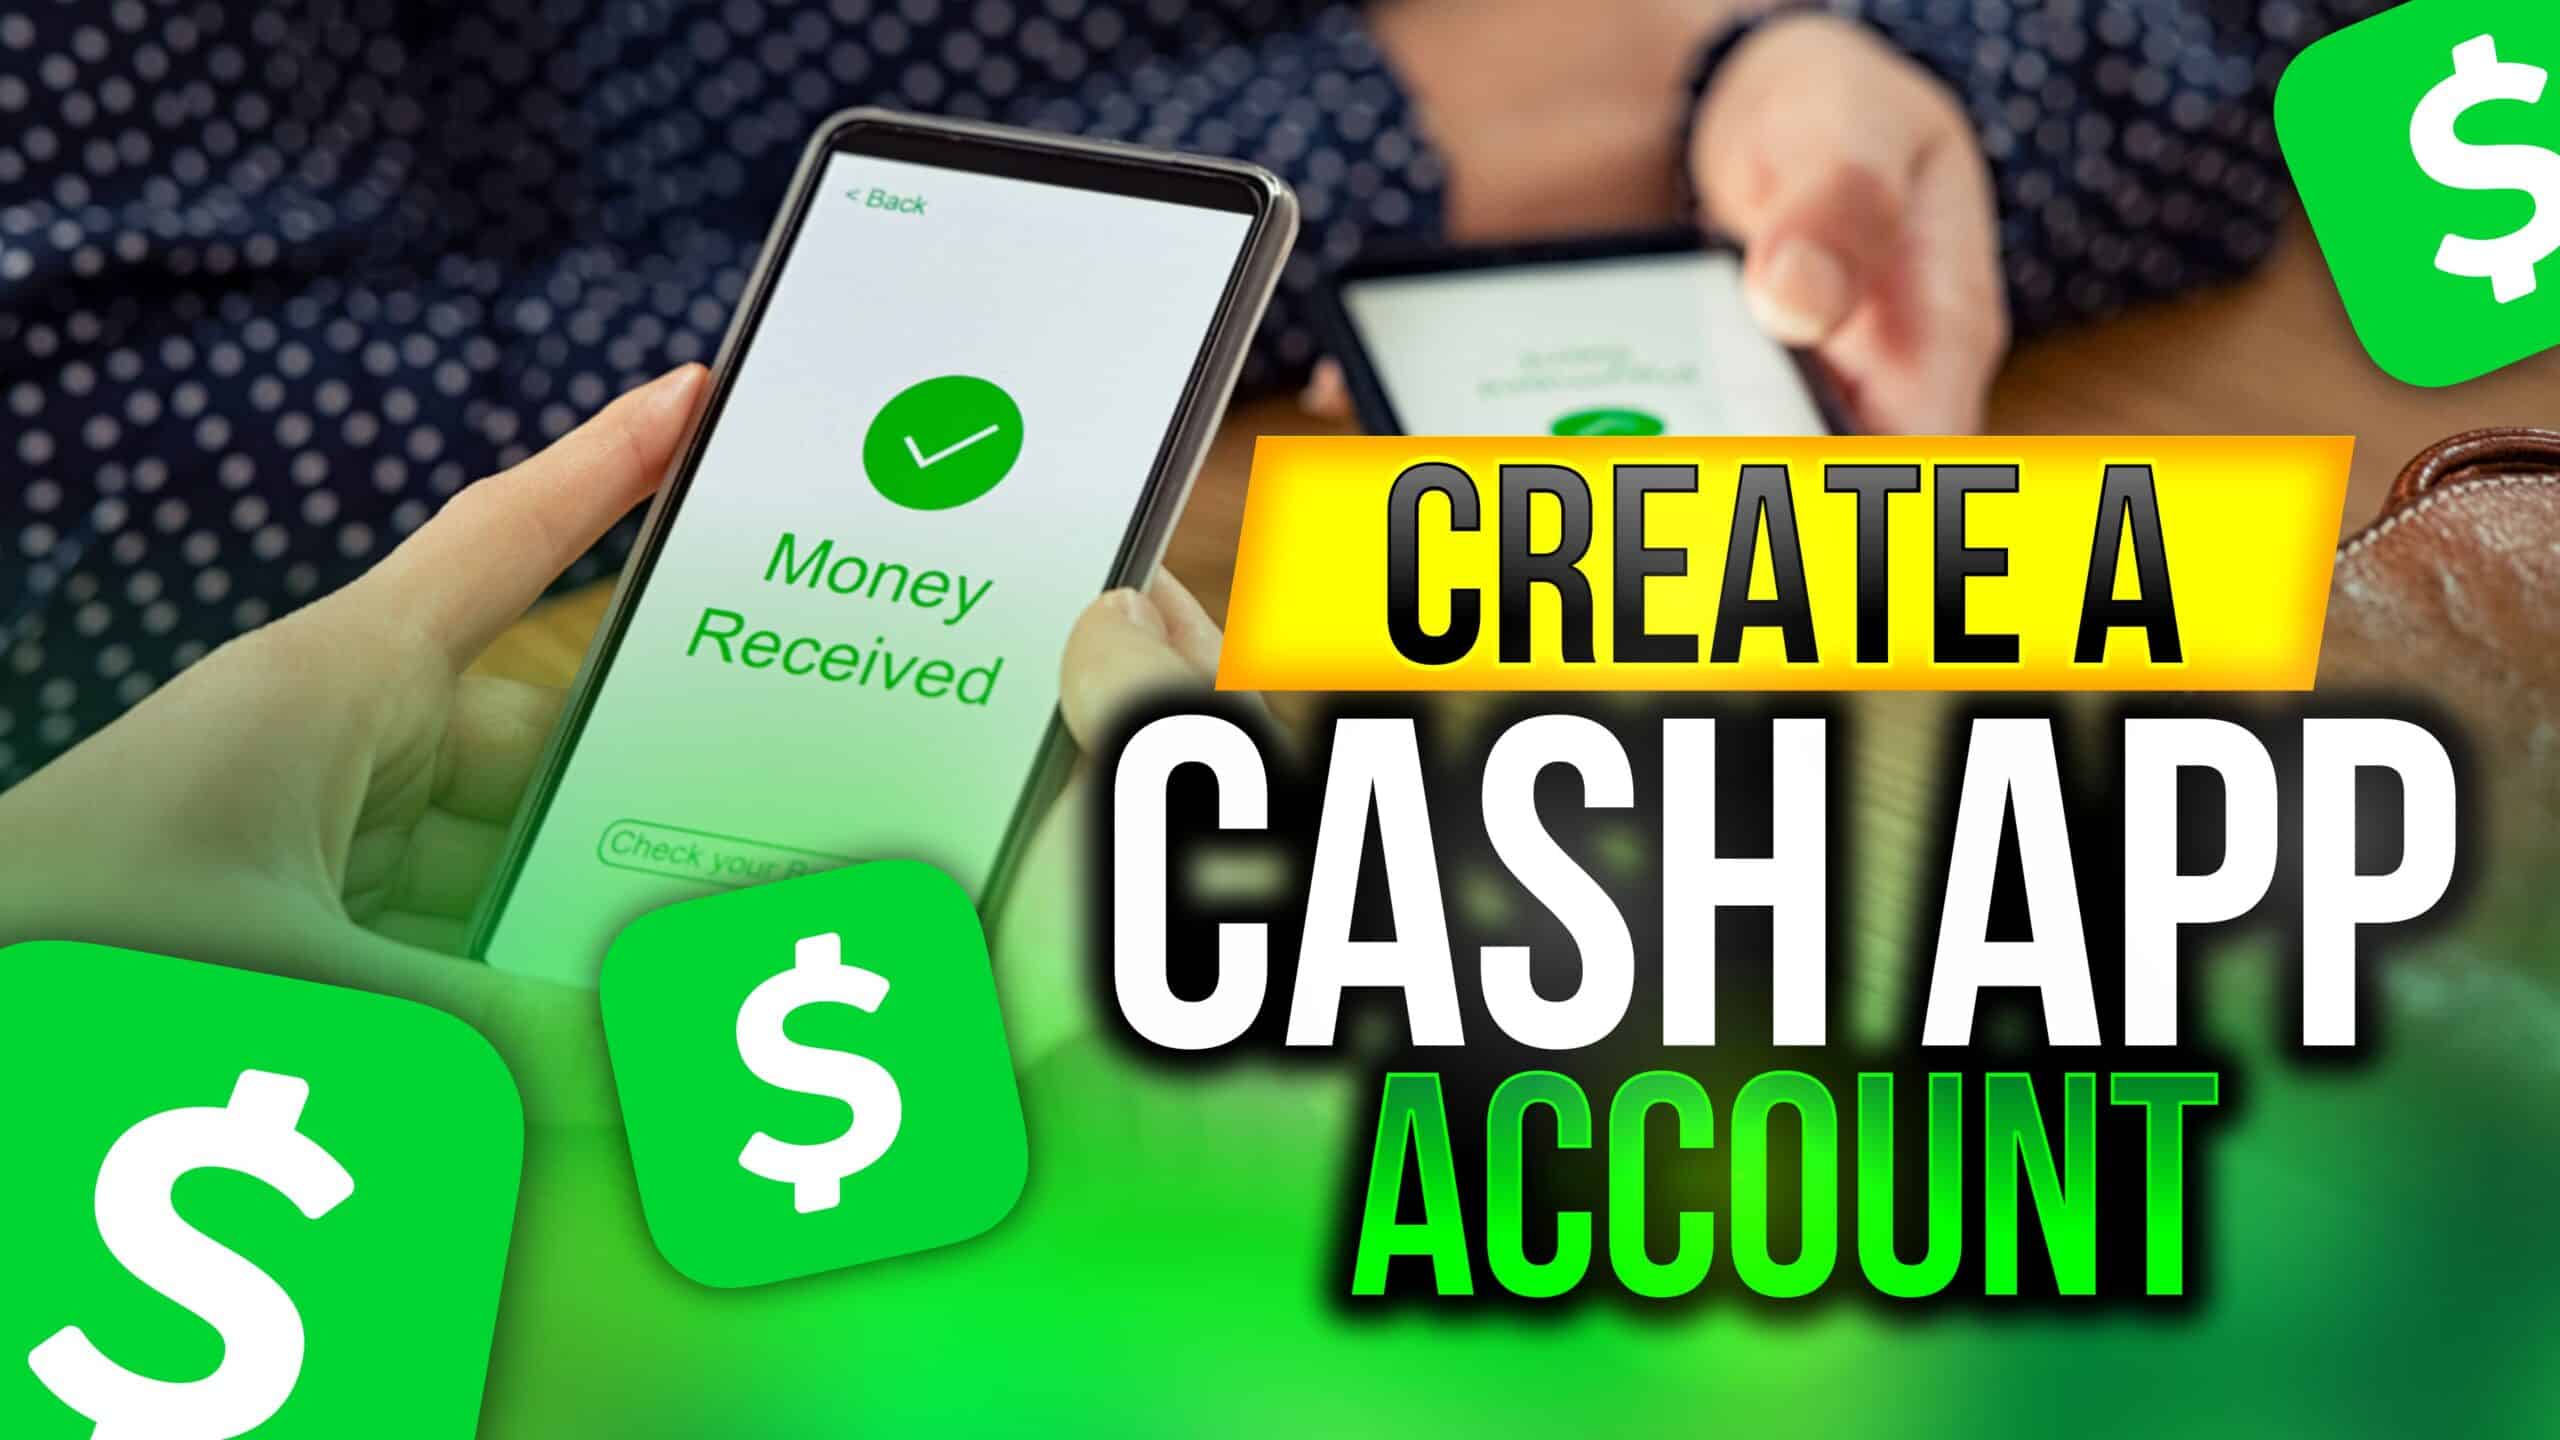 How to Download Cash App and Create Cash App Account